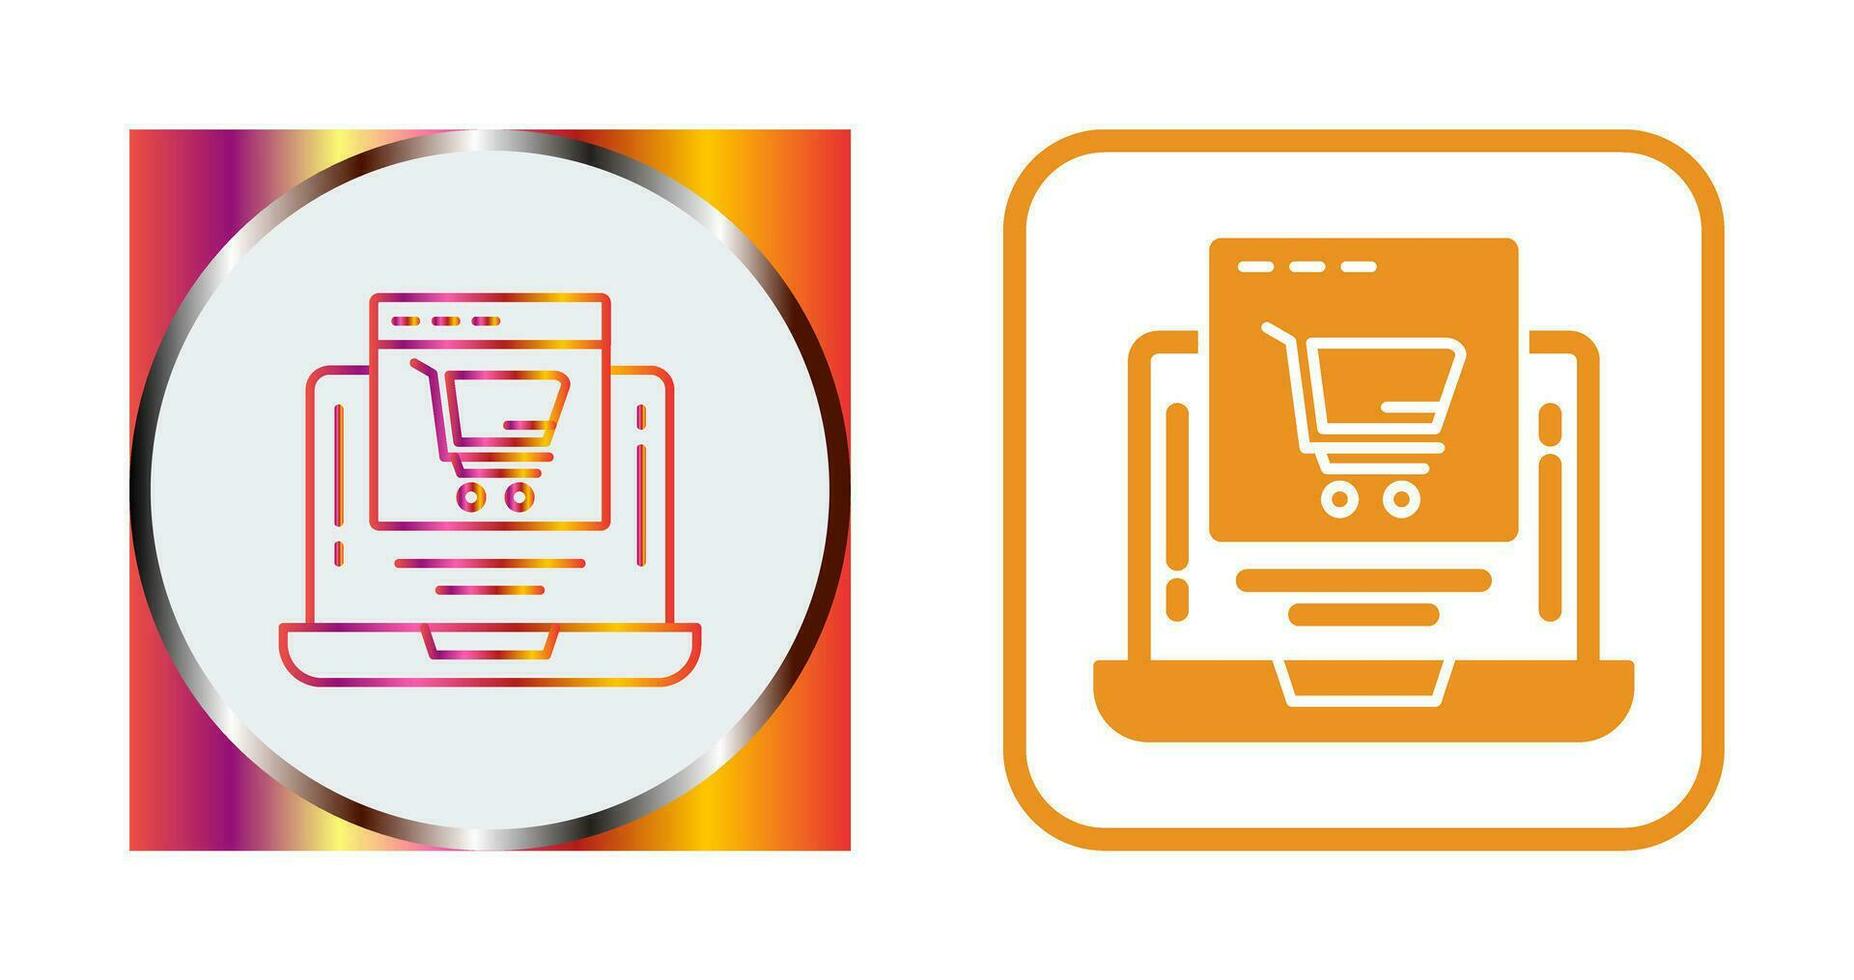 Add to Cart Vector Icon